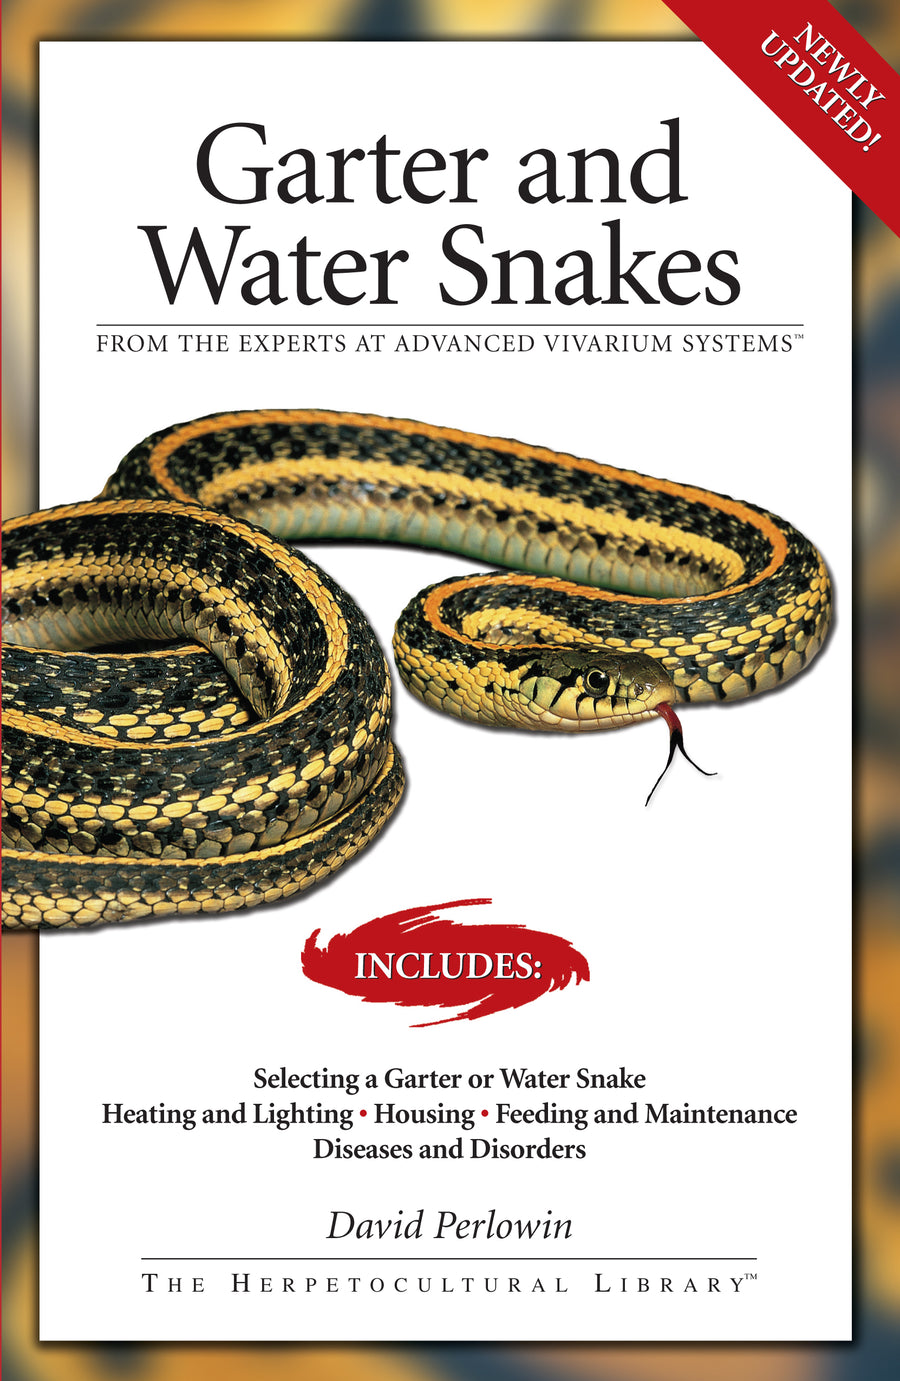 Garter Snakes and Water Snakes Paperback Publication: 2005/03/01